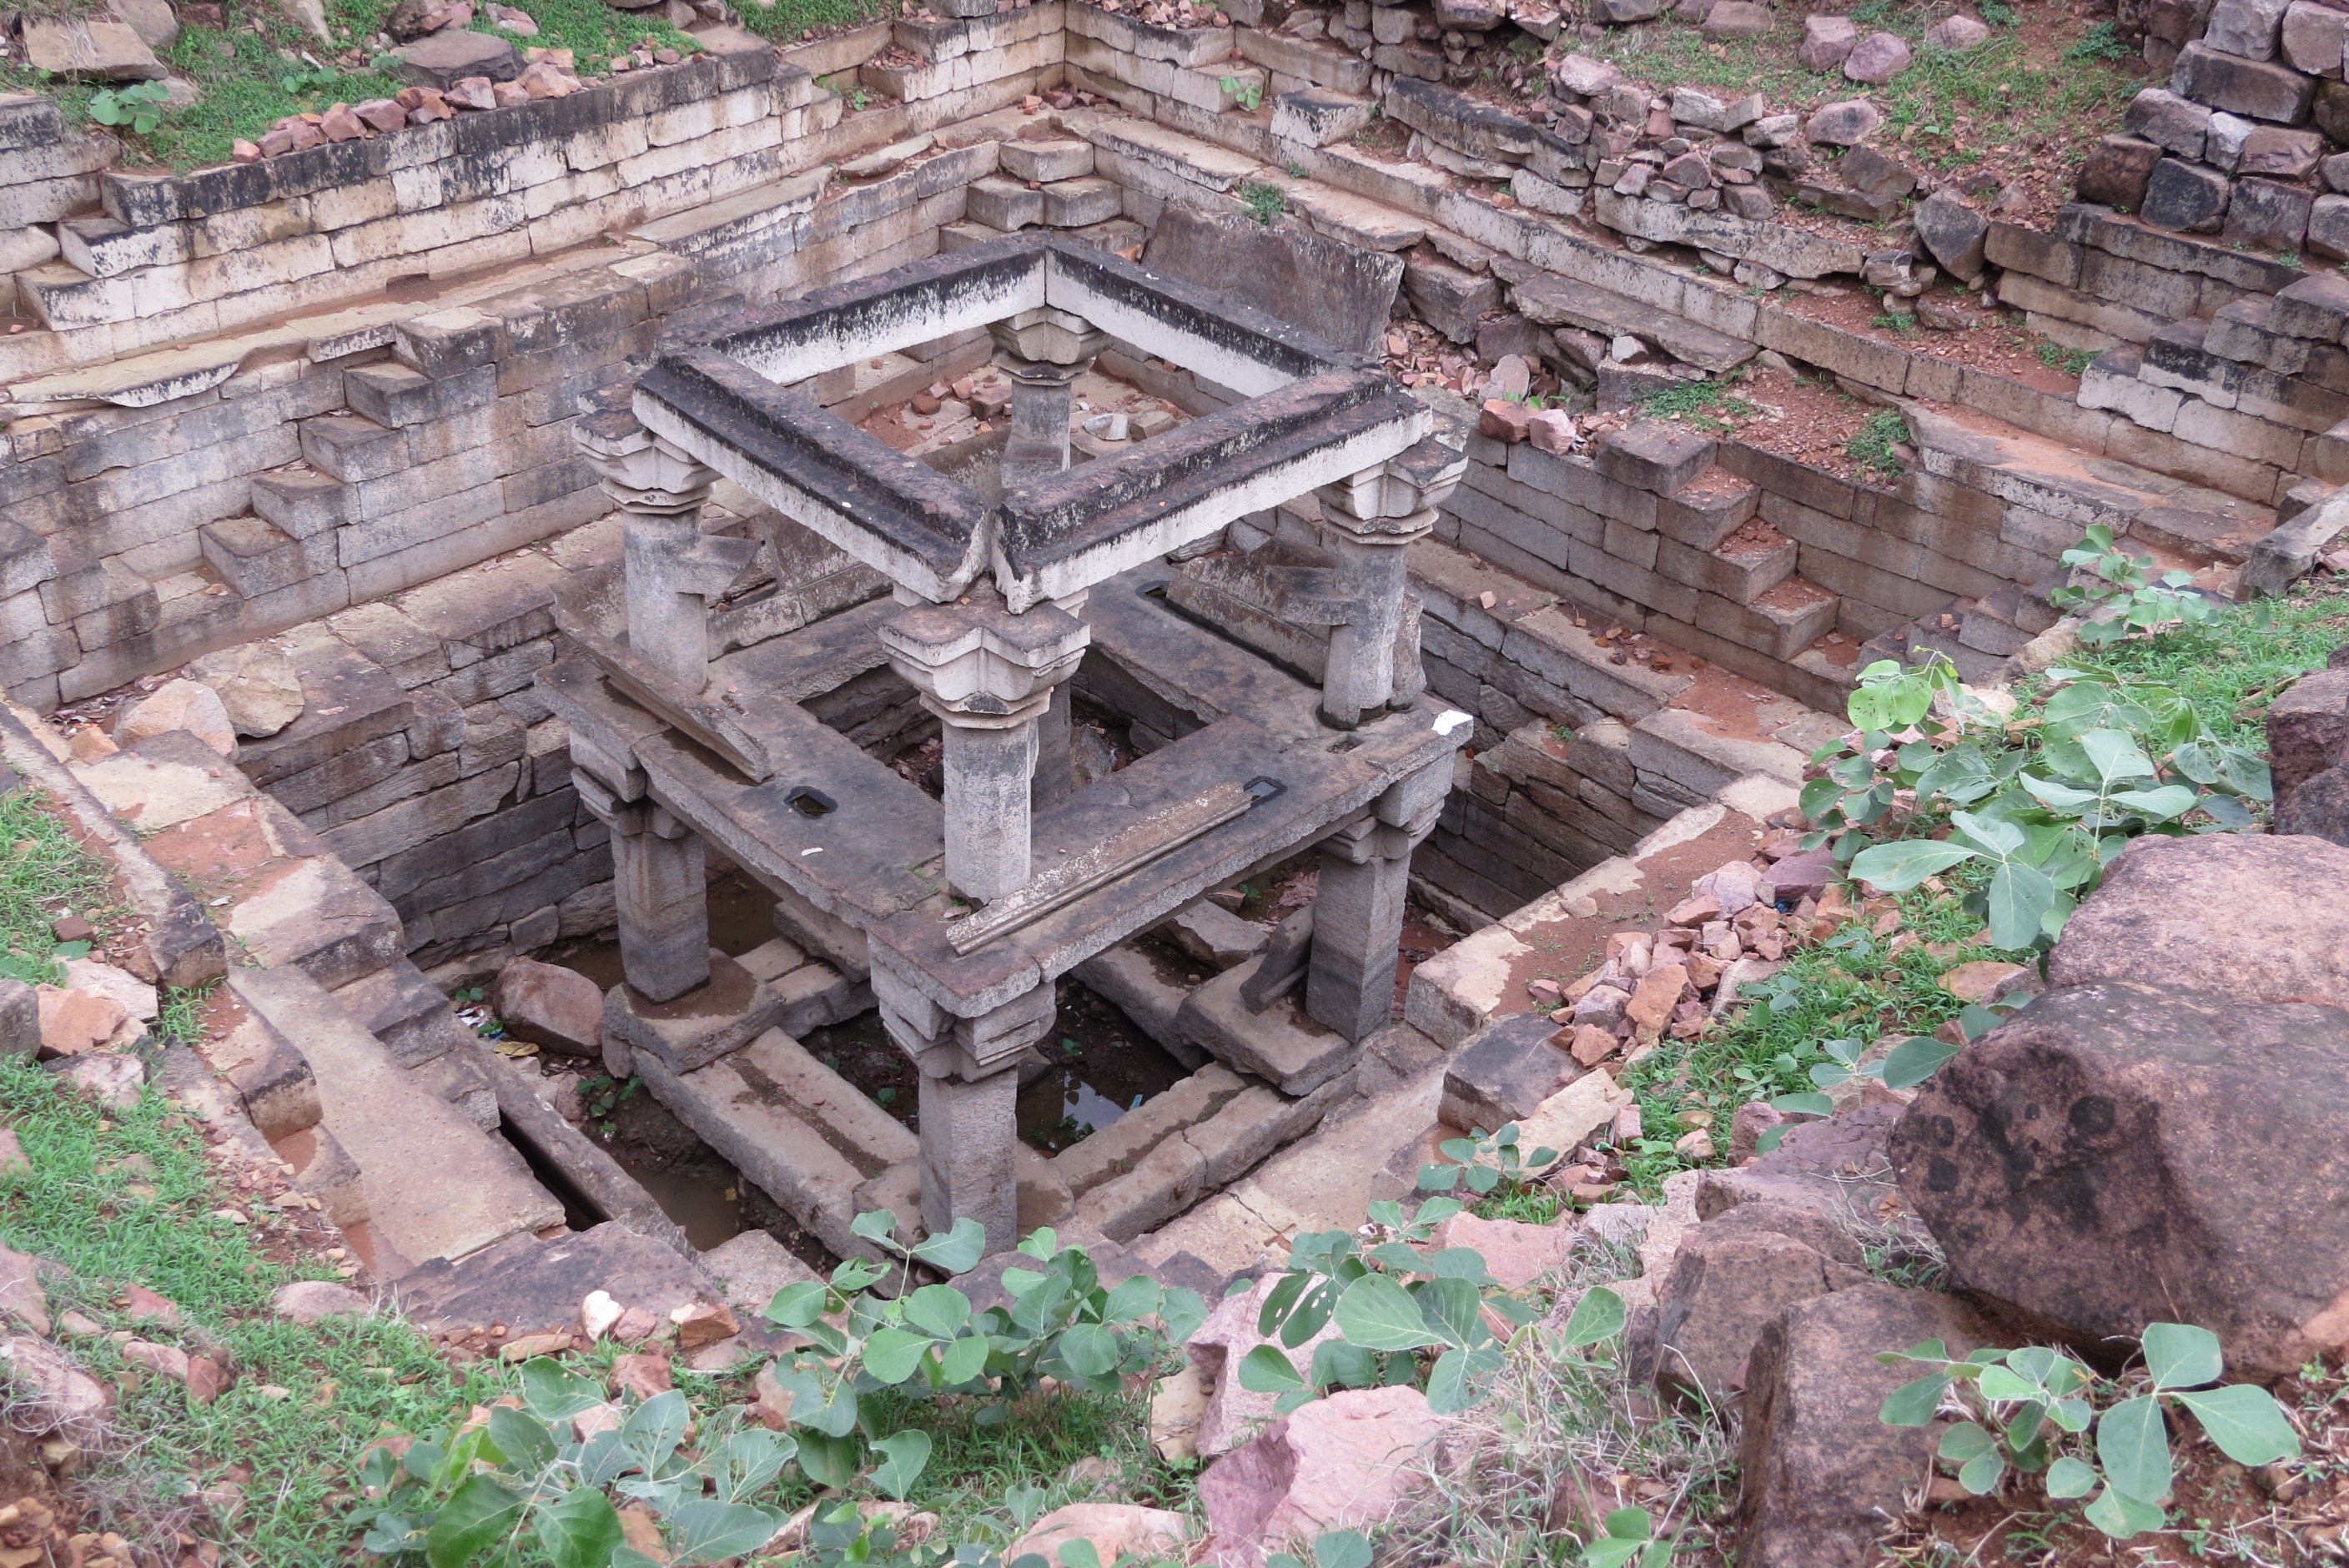 Archeology Department ignoring the tax of its own heritage, God is trusting the security of the temples